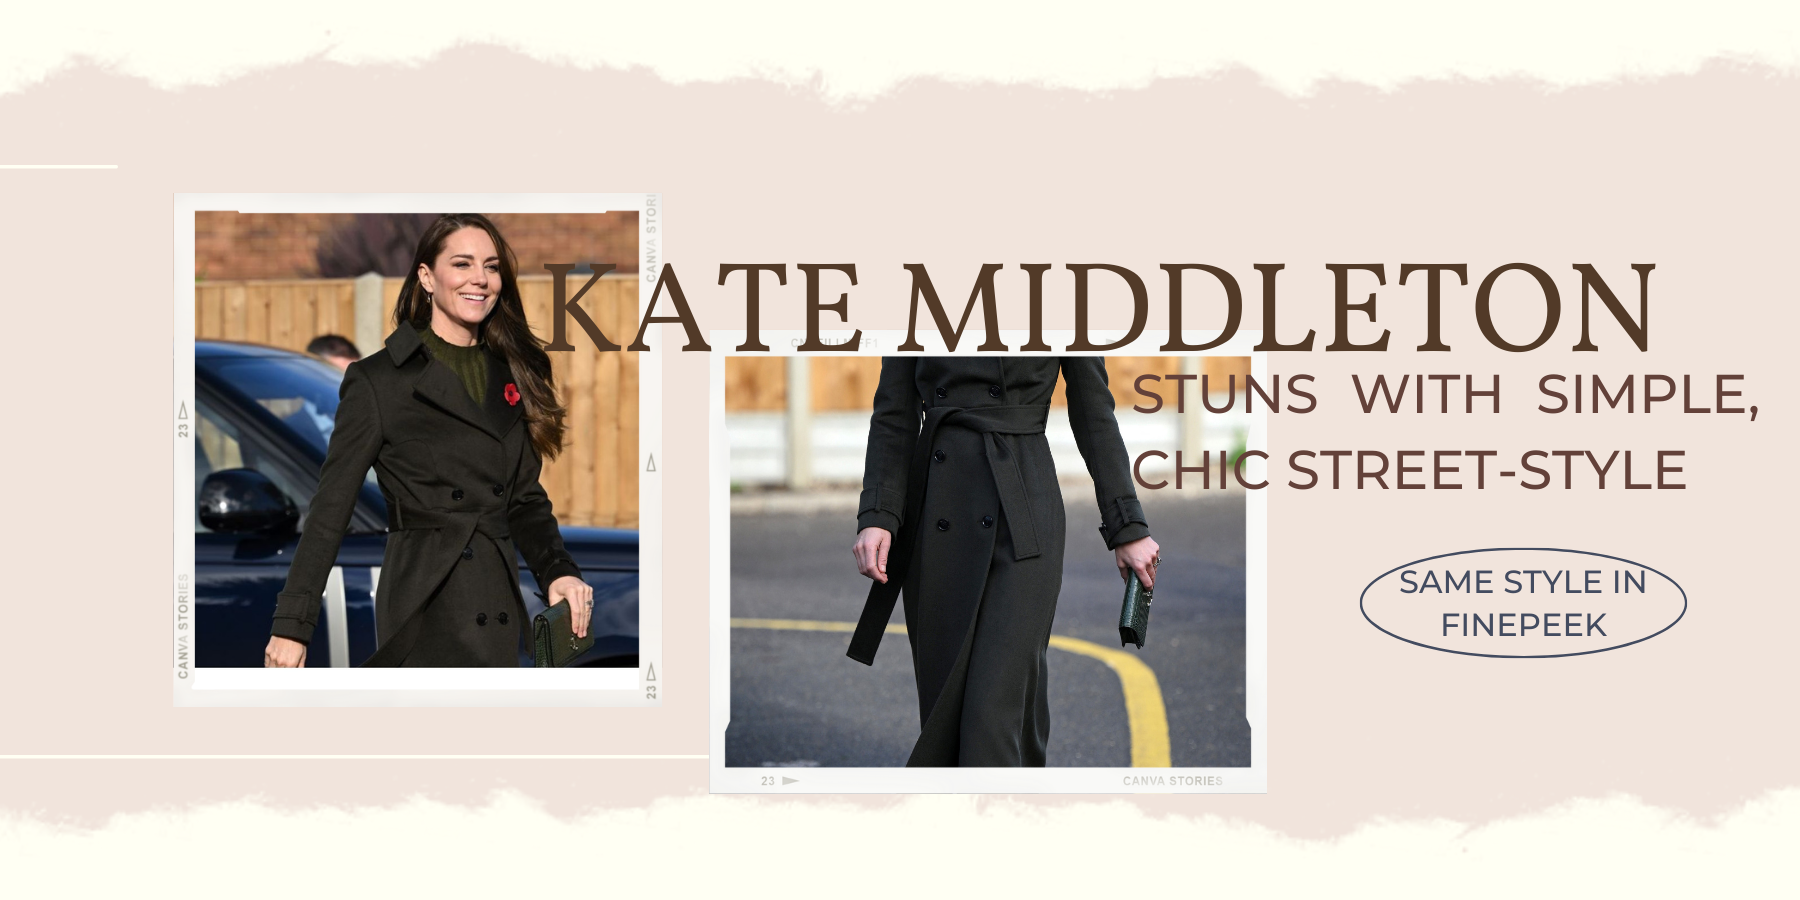 Kate Middleton Stuns with Simple, Chic Street-Style